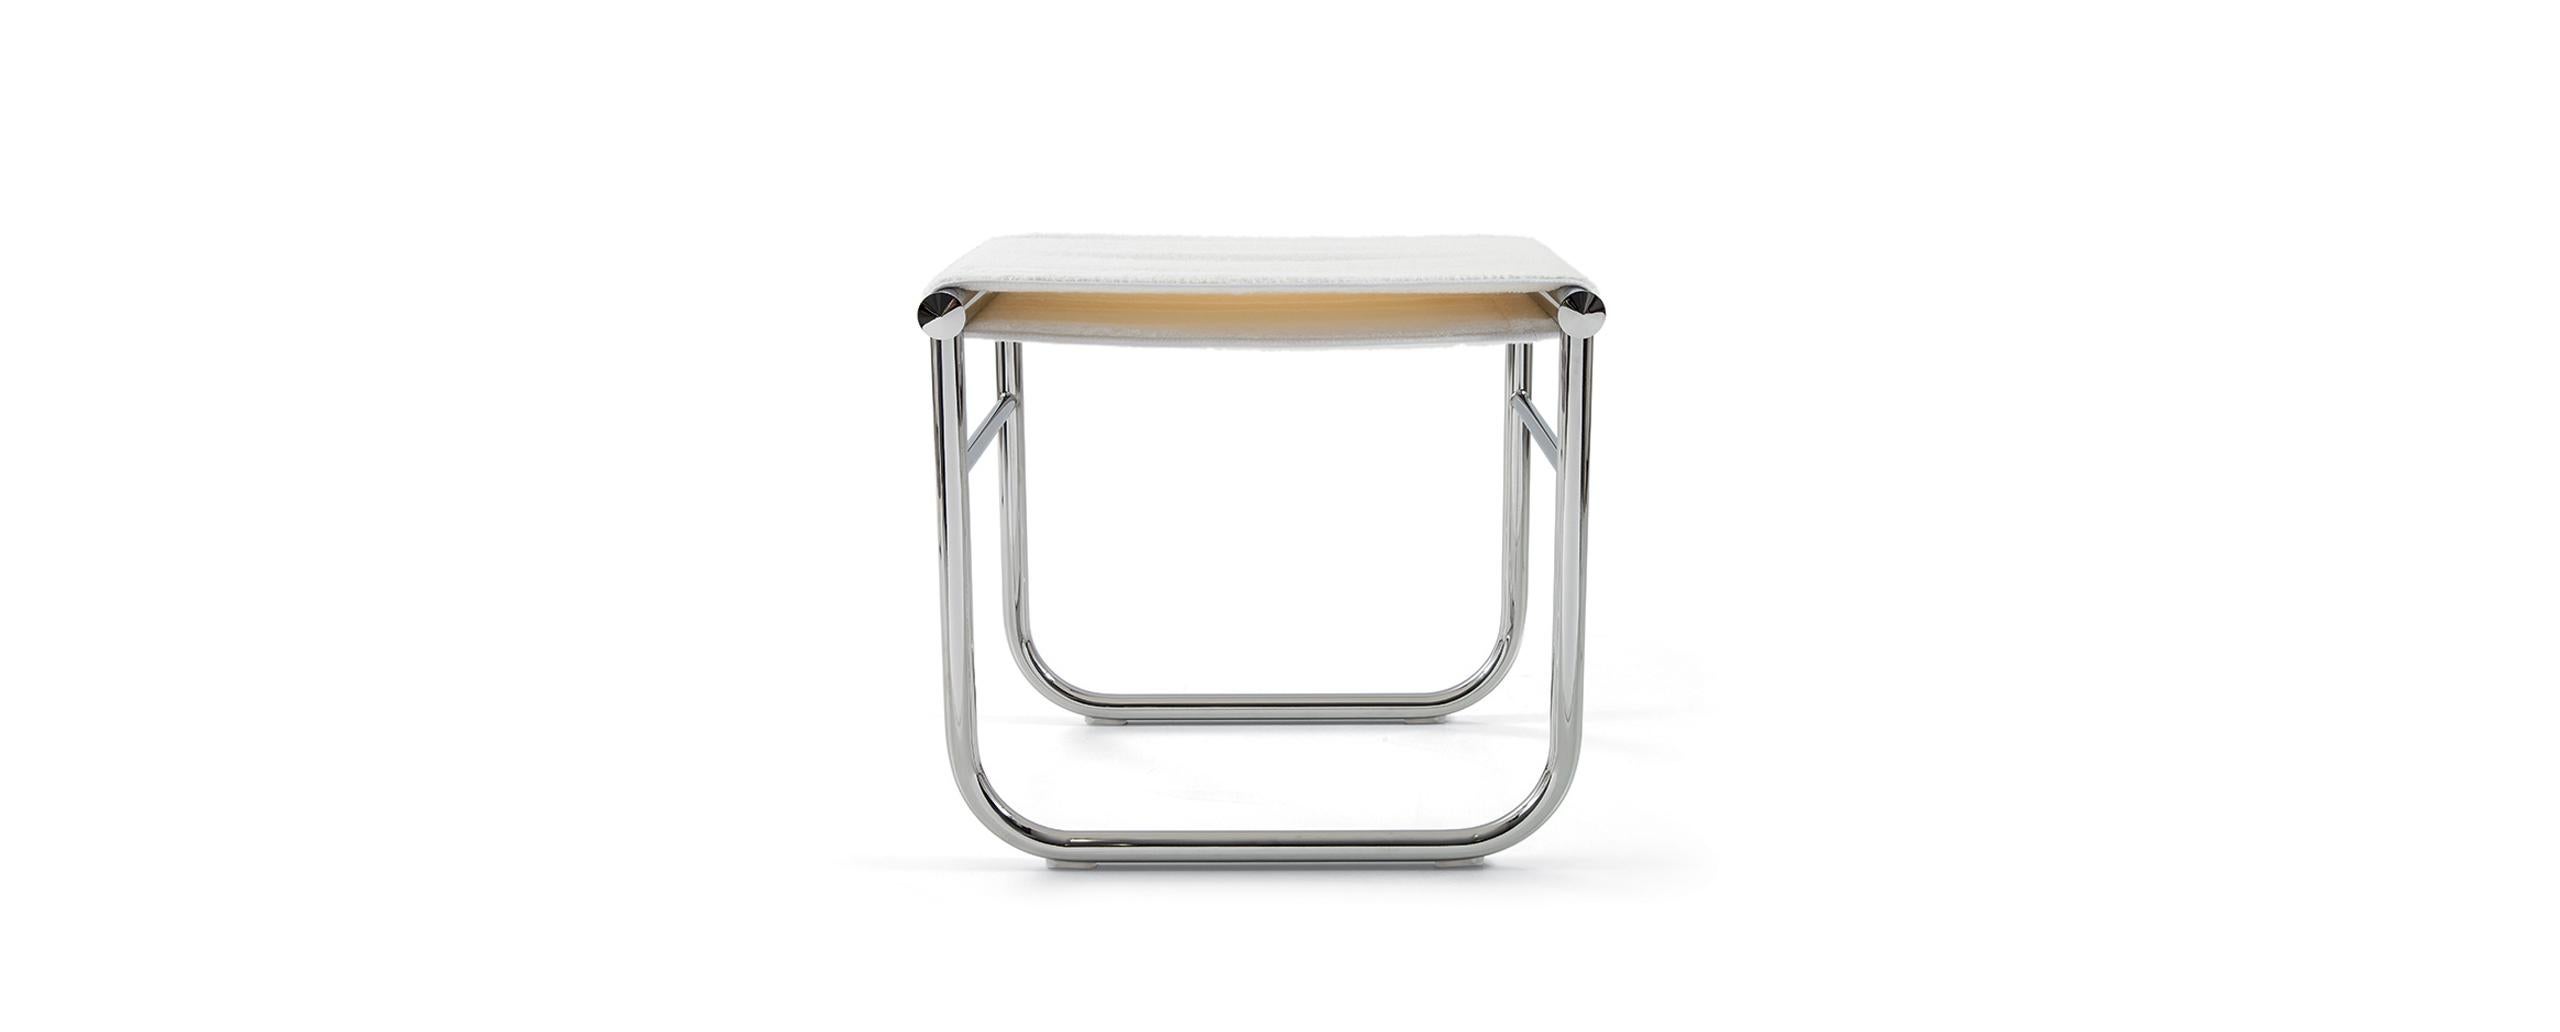 Stool designed by Charlotte Perriand in 1927. Relaunched by Cassina in 1973/2014. Manufactured by Cassina in Italy.

Designed by Charlotte Perriand and part of the LC collection by Le Corbusier, Pierre Jeanneret and Charlotte Perriand.

A stool